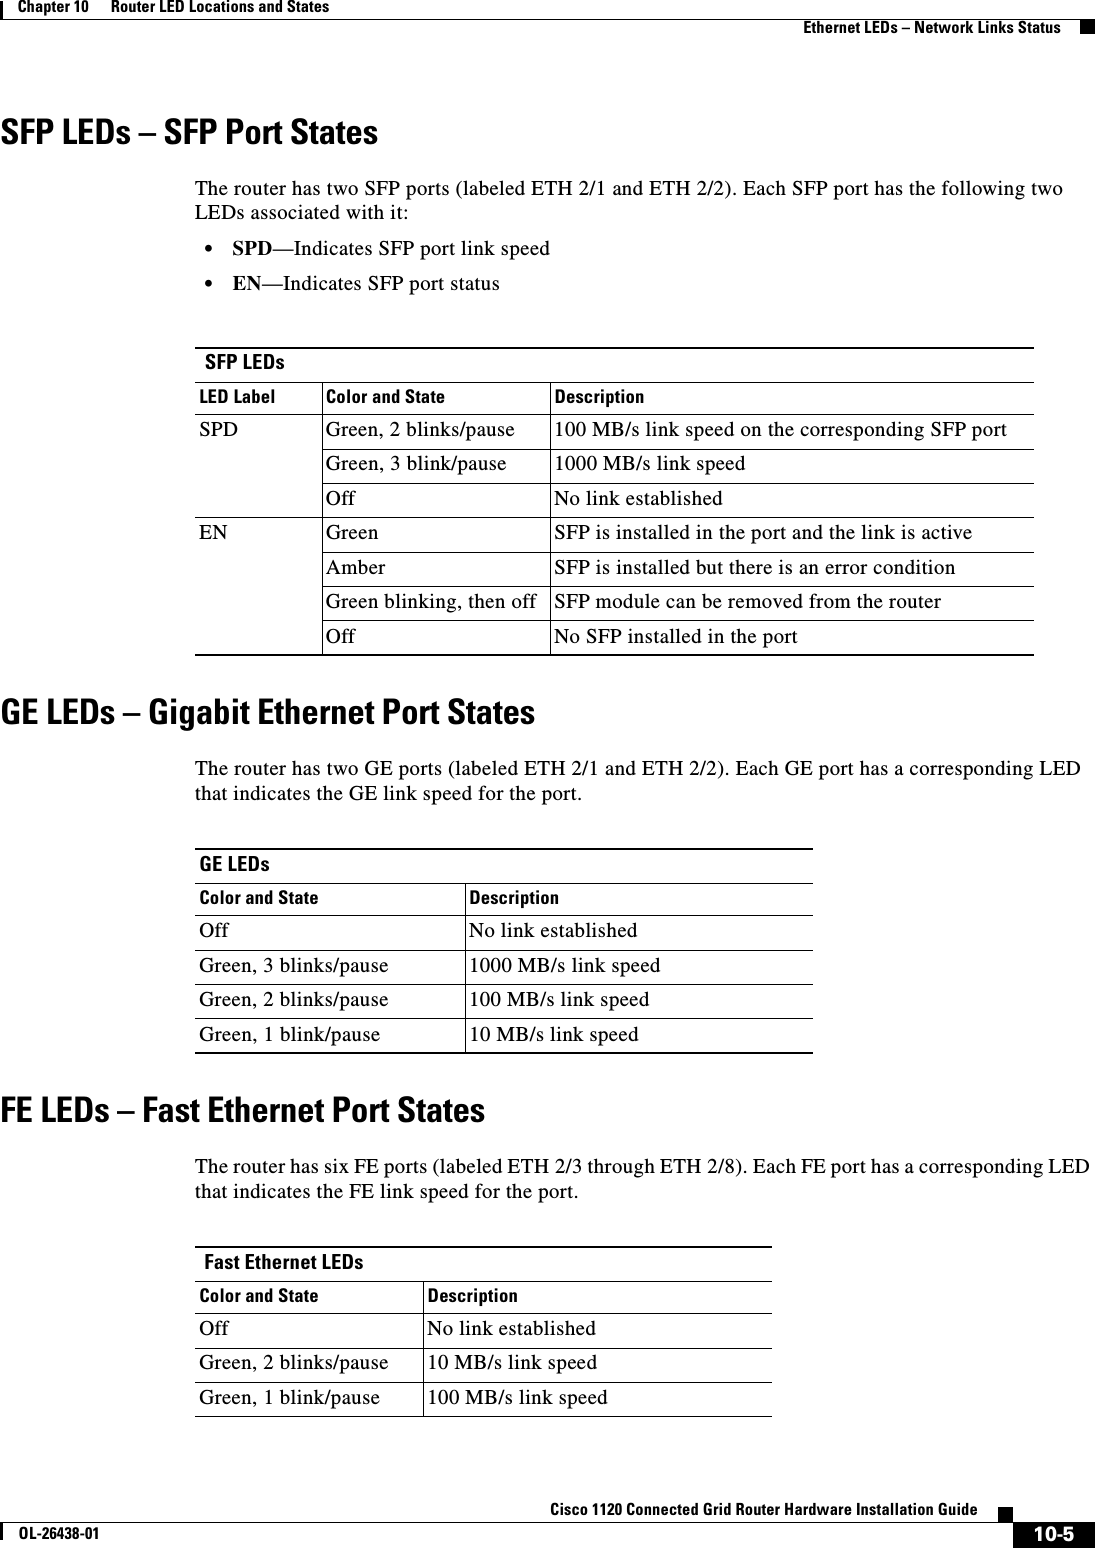 10-5Cisco 1120 Connected Grid Router Hardware Installation GuideOL-26438-01Chapter 10      Router LED Locations and States  Ethernet LEDs – Network Links StatusSFP LEDs – SFP Port StatesThe router has two SFP ports (labeled ETH 2/1 and ETH 2/2). Each SFP port has the following two LEDs associated with it:•SPD—Indicates SFP port link speed•EN—Indicates SFP port statusGE LEDs – Gigabit Ethernet Port StatesThe router has two GE ports (labeled ETH 2/1 and ETH 2/2). Each GE port has a corresponding LED that indicates the GE link speed for the port.FE LEDs – Fast Ethernet Port StatesThe router has six FE ports (labeled ETH 2/3 through ETH 2/8). Each FE port has a corresponding LED that indicates the FE link speed for the port. SFP LEDsLED Label Color and State DescriptionSPD Green, 2 blinks/pause 100 MB/s link speed on the corresponding SFP portGreen, 3 blink/pause 1000 MB/s link speedOff No link establishedEN Green SFP is installed in the port and the link is activeAmber SFP is installed but there is an error conditionGreen blinking, then off SFP module can be removed from the routerOff No SFP installed in the portGE LEDsColor and State DescriptionOff No link establishedGreen, 3 blinks/pause 1000 MB/s link speedGreen, 2 blinks/pause 100 MB/s link speedGreen, 1 blink/pause 10 MB/s link speed Fast Ethernet LEDsColor and State DescriptionOff No link establishedGreen, 2 blinks/pause 10 MB/s link speedGreen, 1 blink/pause 100 MB/s link speed